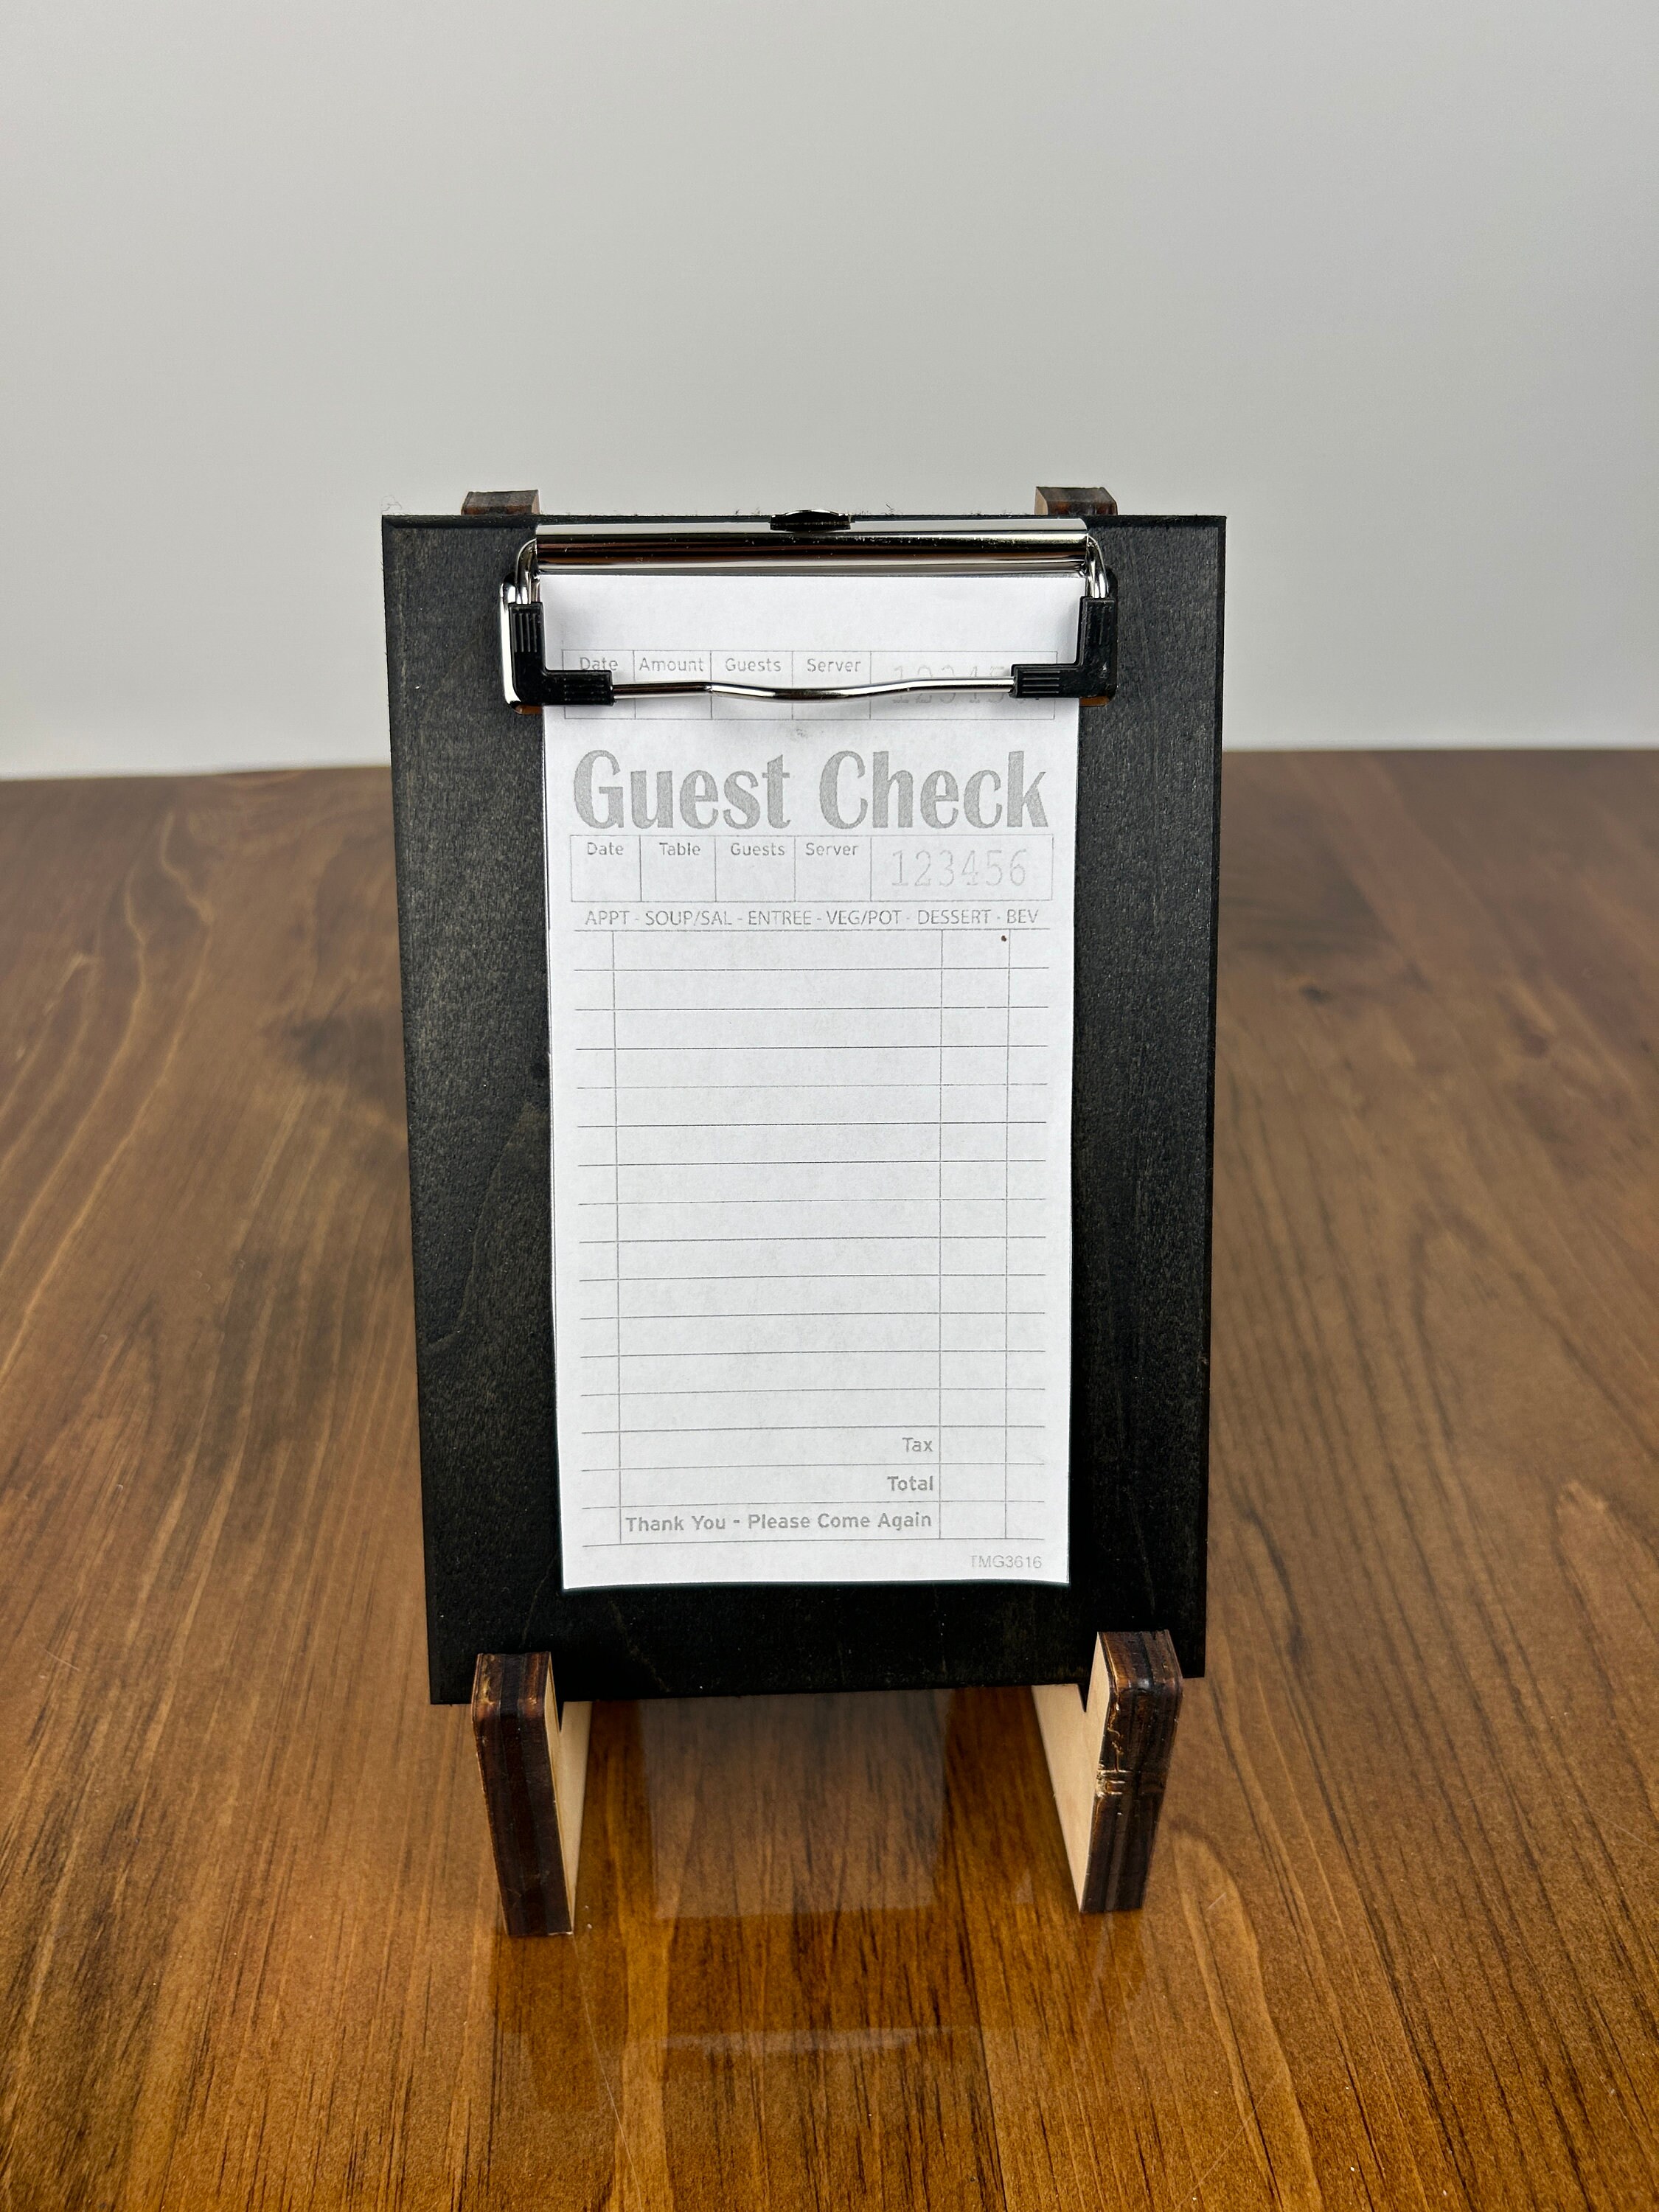 Large Wood Table Tent Clipboard With Two Clips 8.5x11 Menu Table